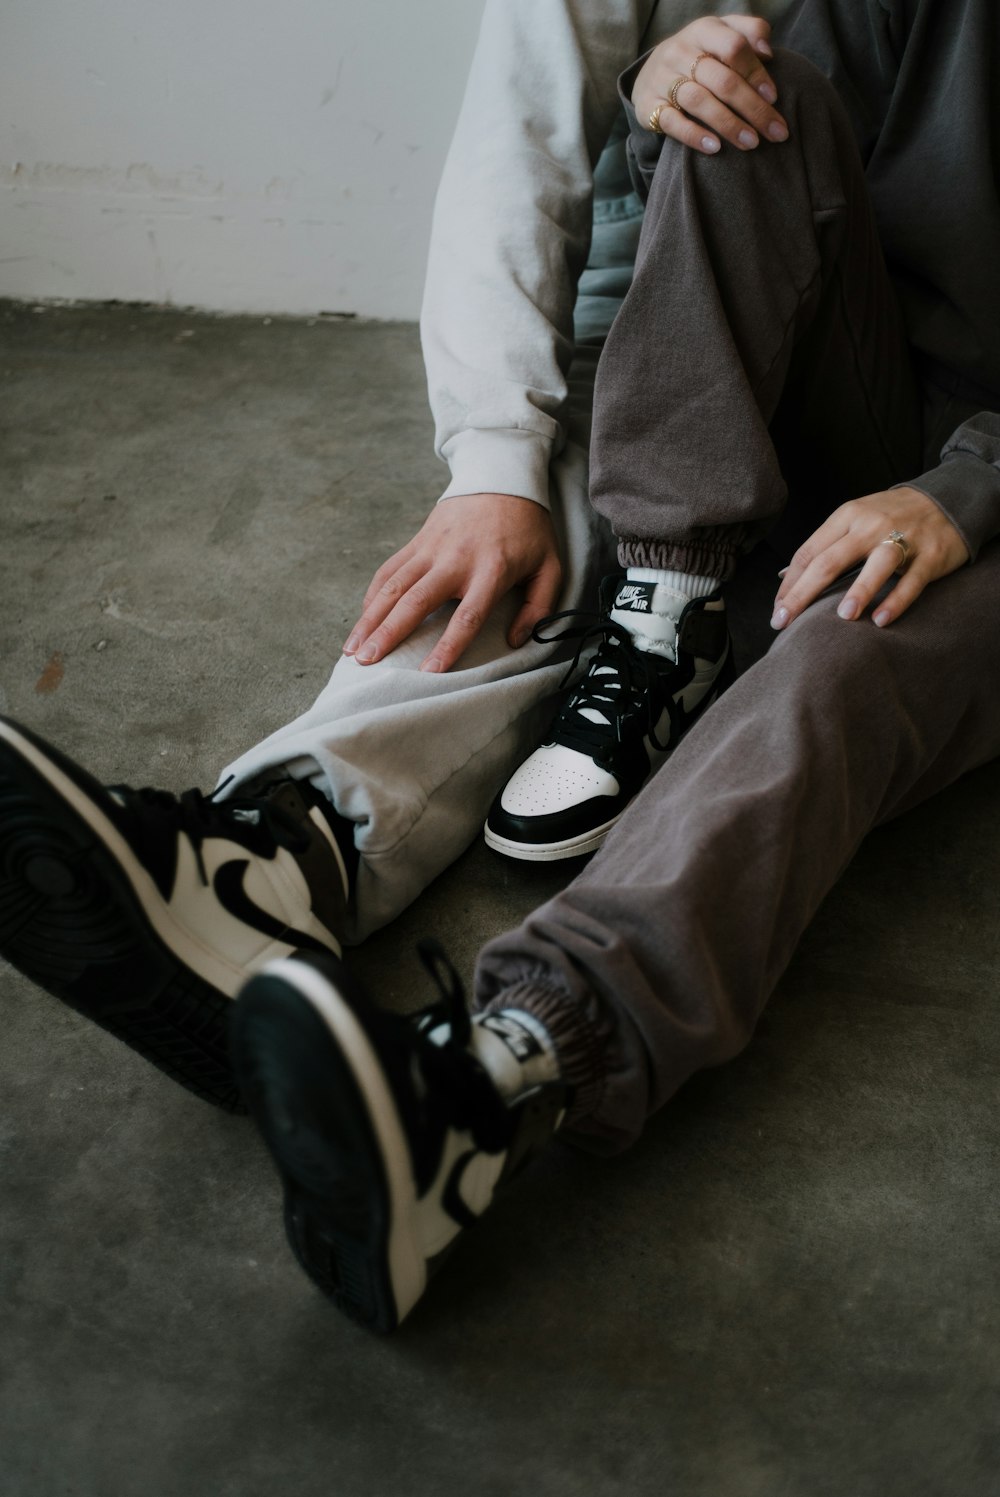 Couple Shoes Pictures | Download Free Images on Unsplash